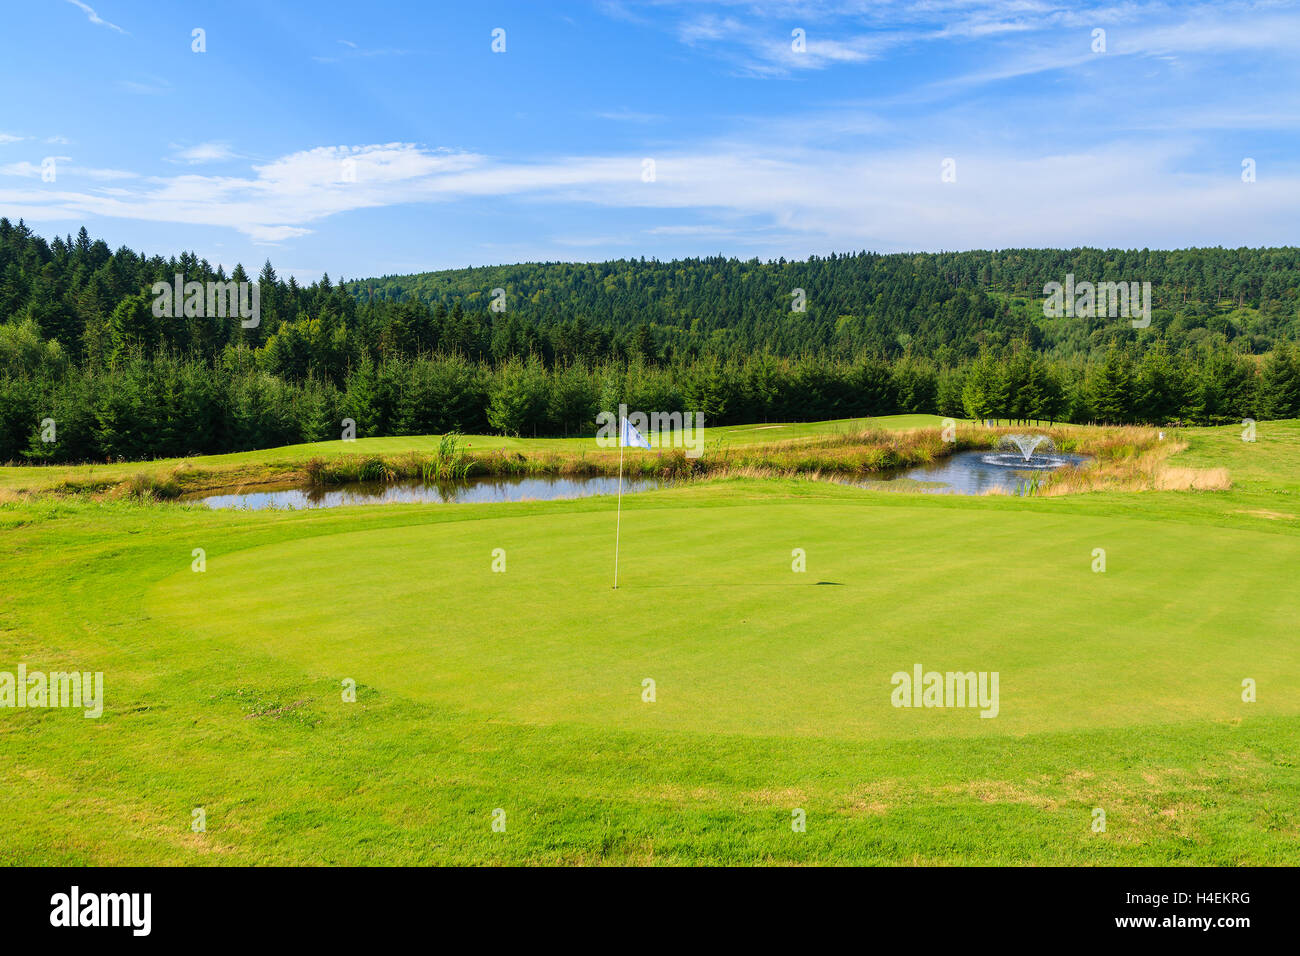 ARLAMOW GOLF COURSE, POLAND - AUG 3, 2014: beautiful golf play area on sunny summer day in Arlamow Hotel. This luxury hotel was owned by Poland's government and is located in Bieszczady Mountains. Stock Photo